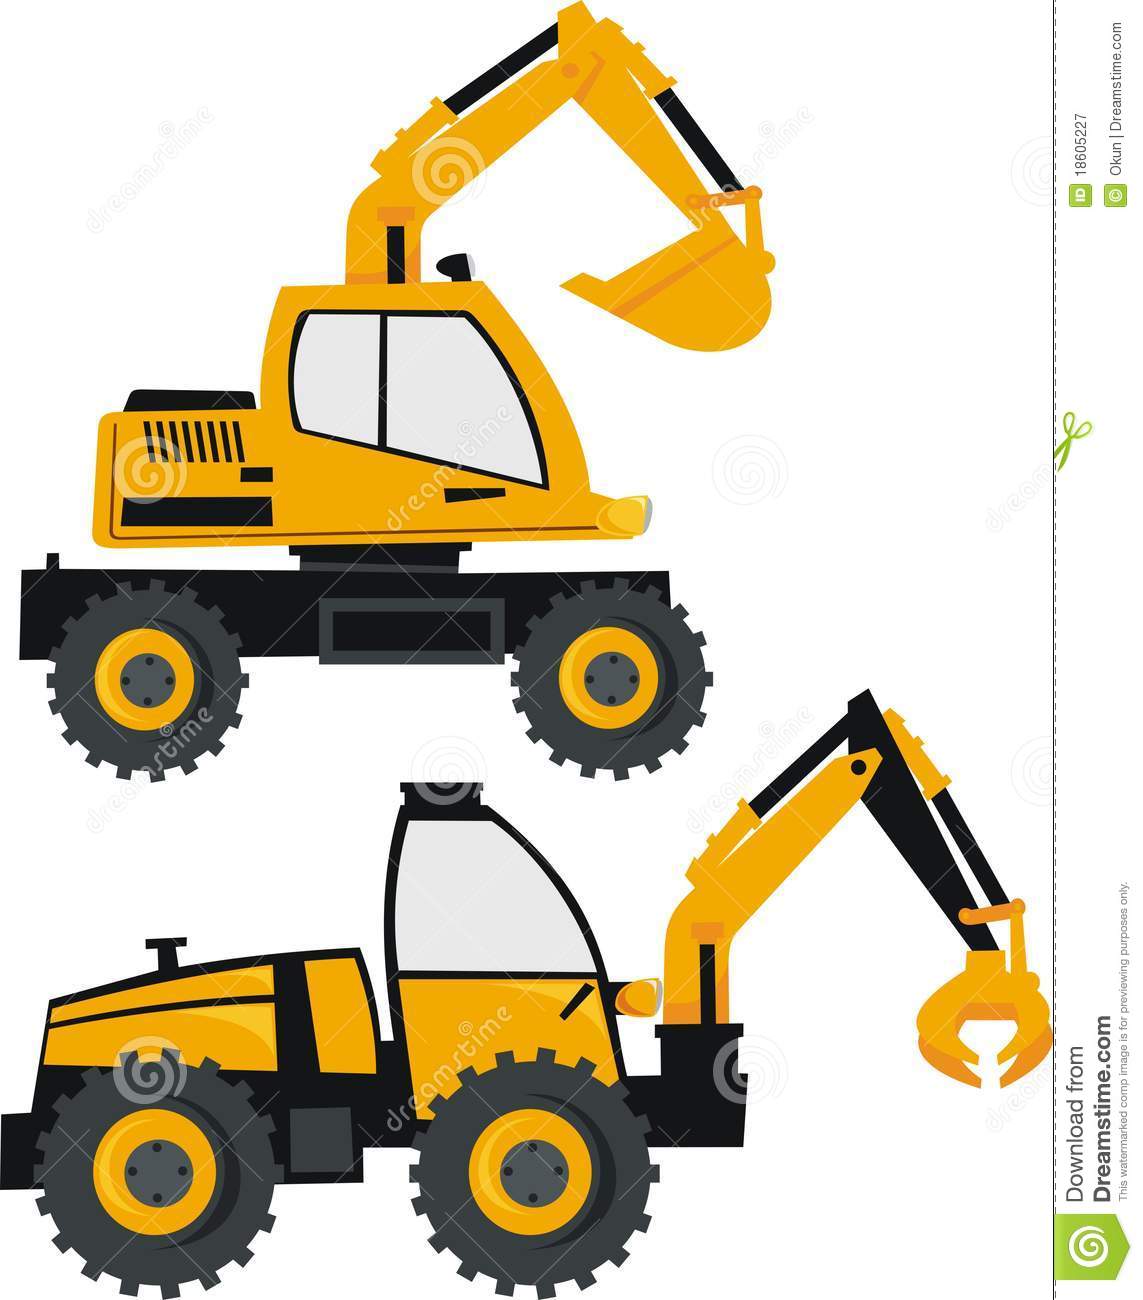 Displaying 20  Images For   Cat Backhoe Clipart   